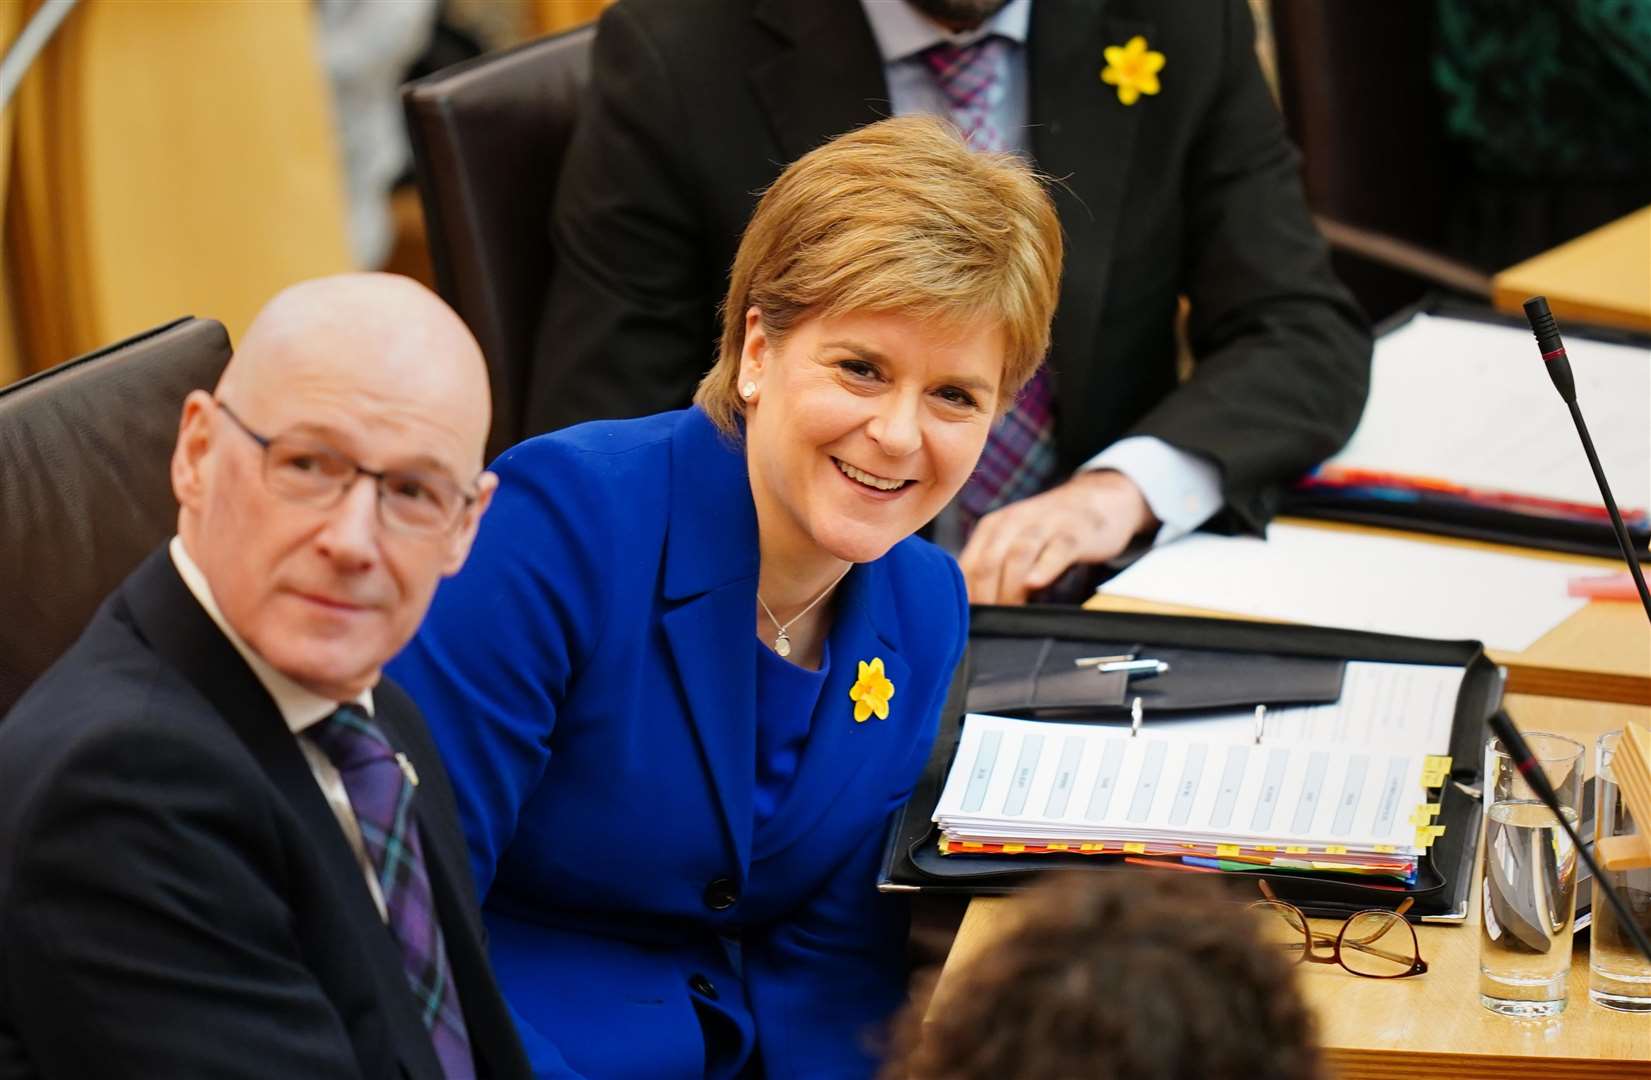 Nicola Sturgeon said being First Minister had been ‘the privilege of my lifetime’ (Jane Barlow/PA)